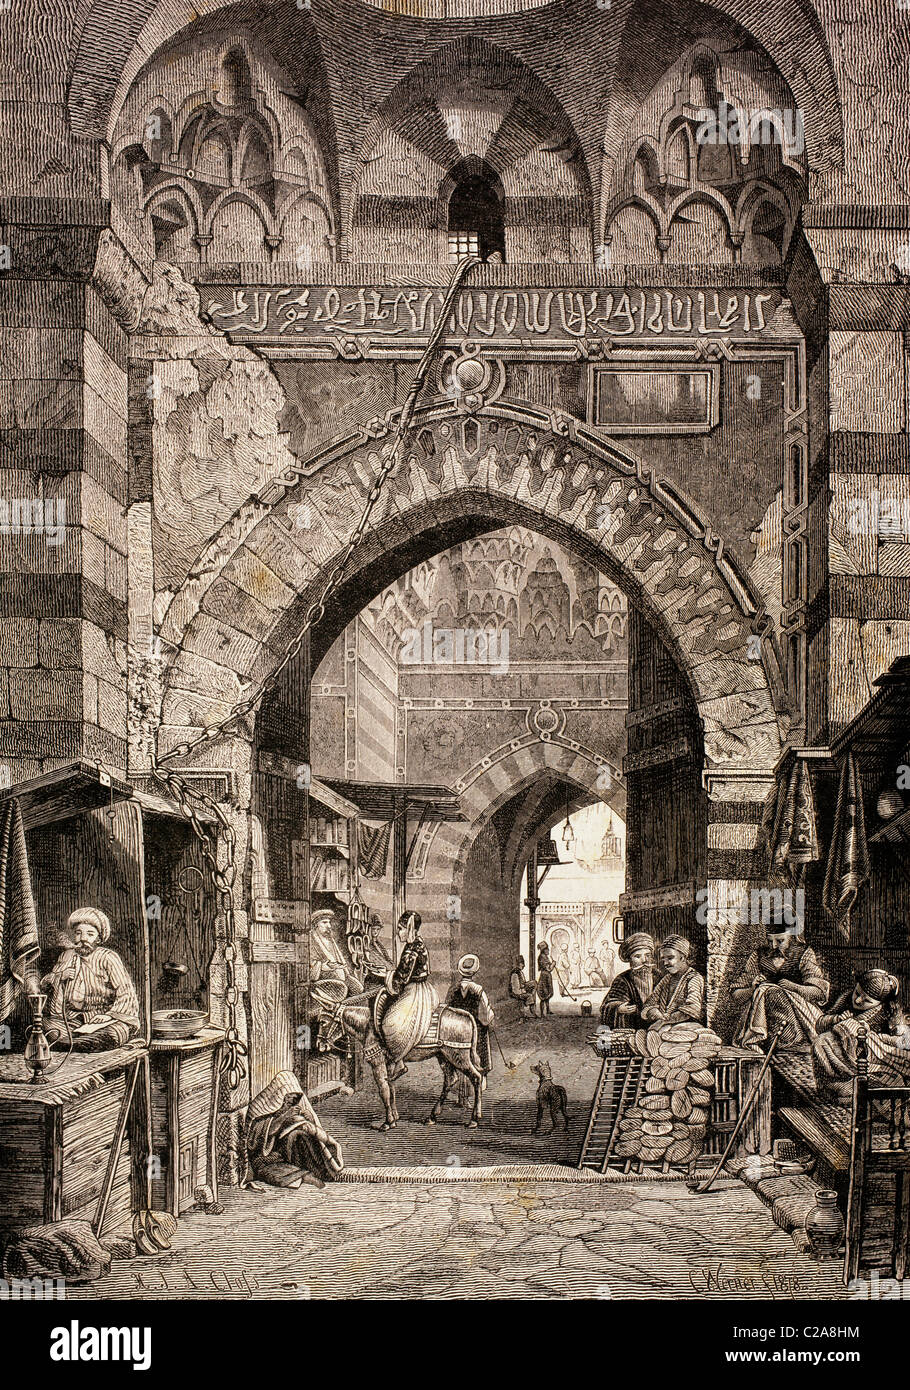 Entrance to the Khan el-Khalili souk or market in Cairo, Egypt, in the 19th century. Stock Photo